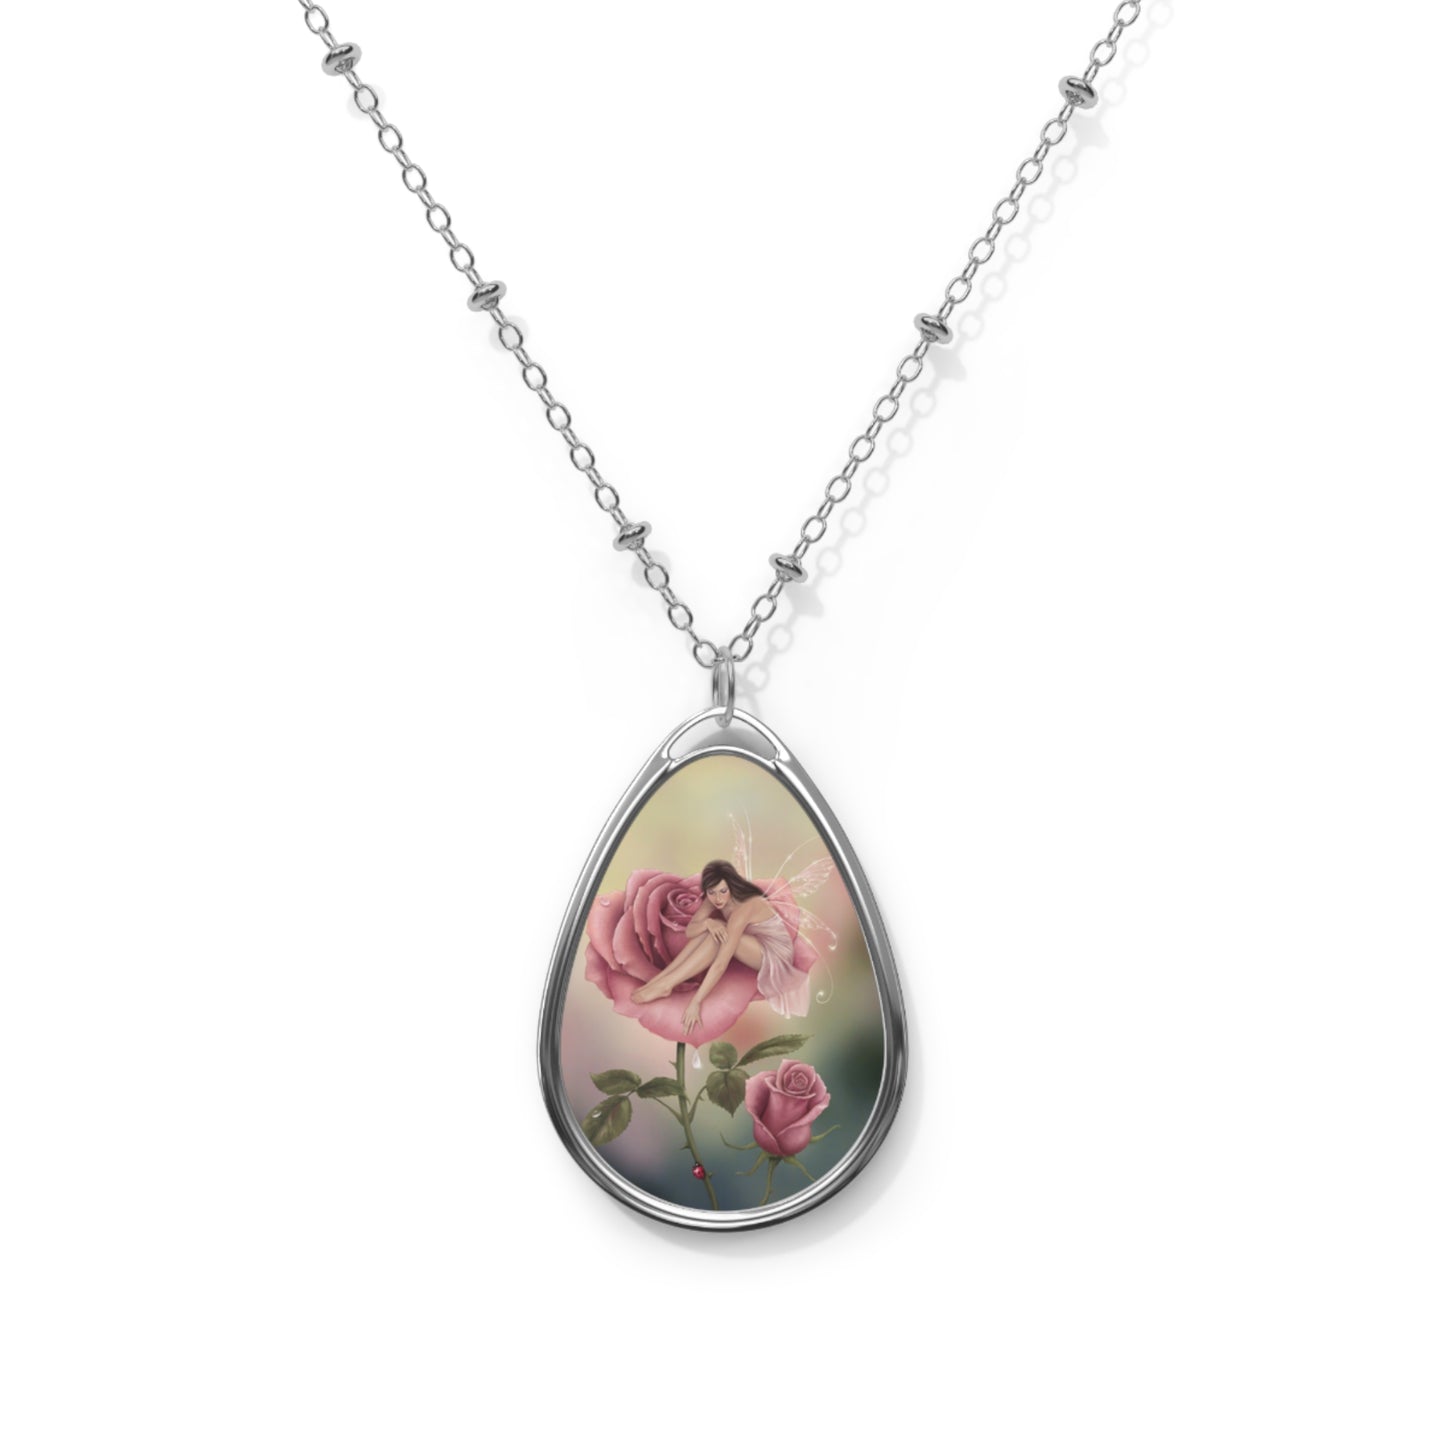 Necklace - Rose